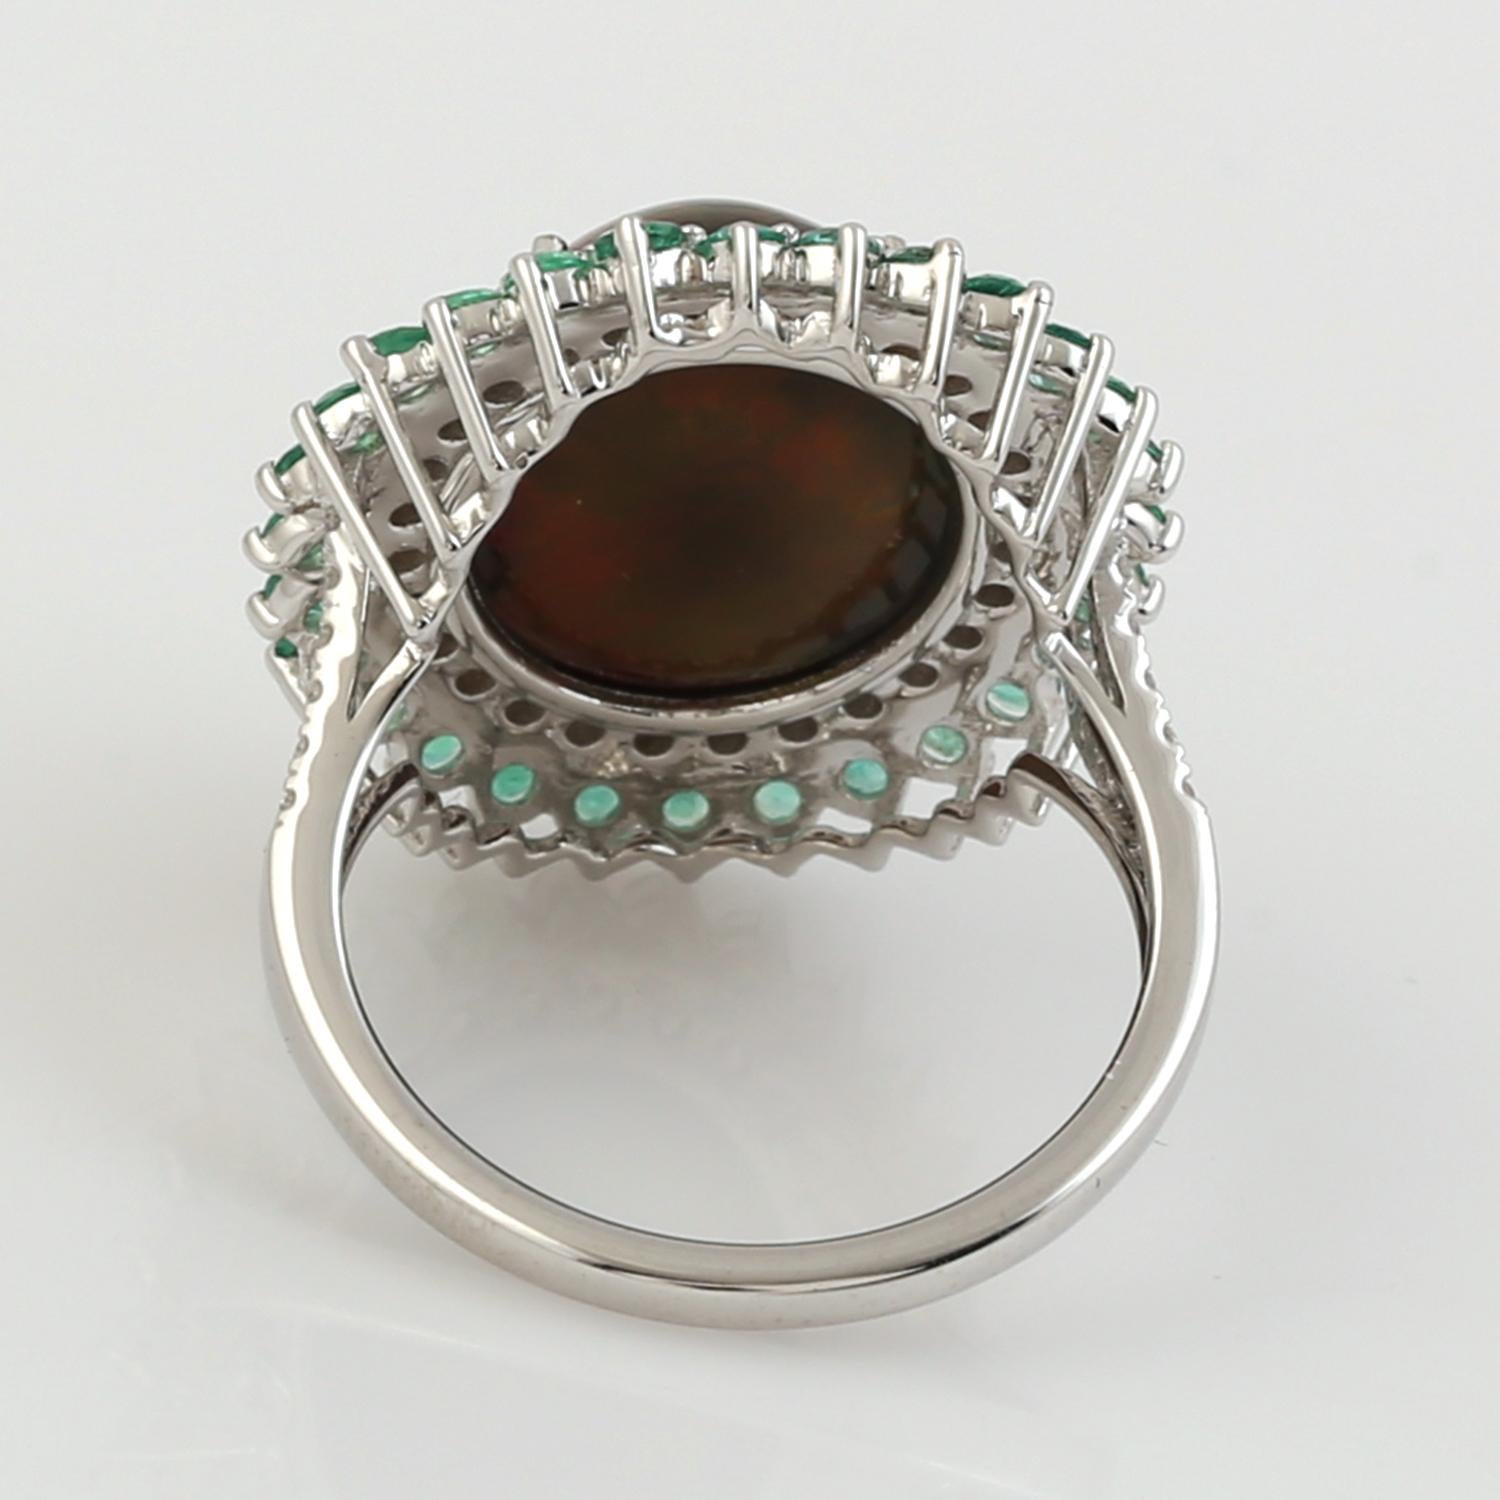 Contemporary Oval Shped Opal Ring With Emerald & Pave Diamonds Made In 18K White Gold For Sale